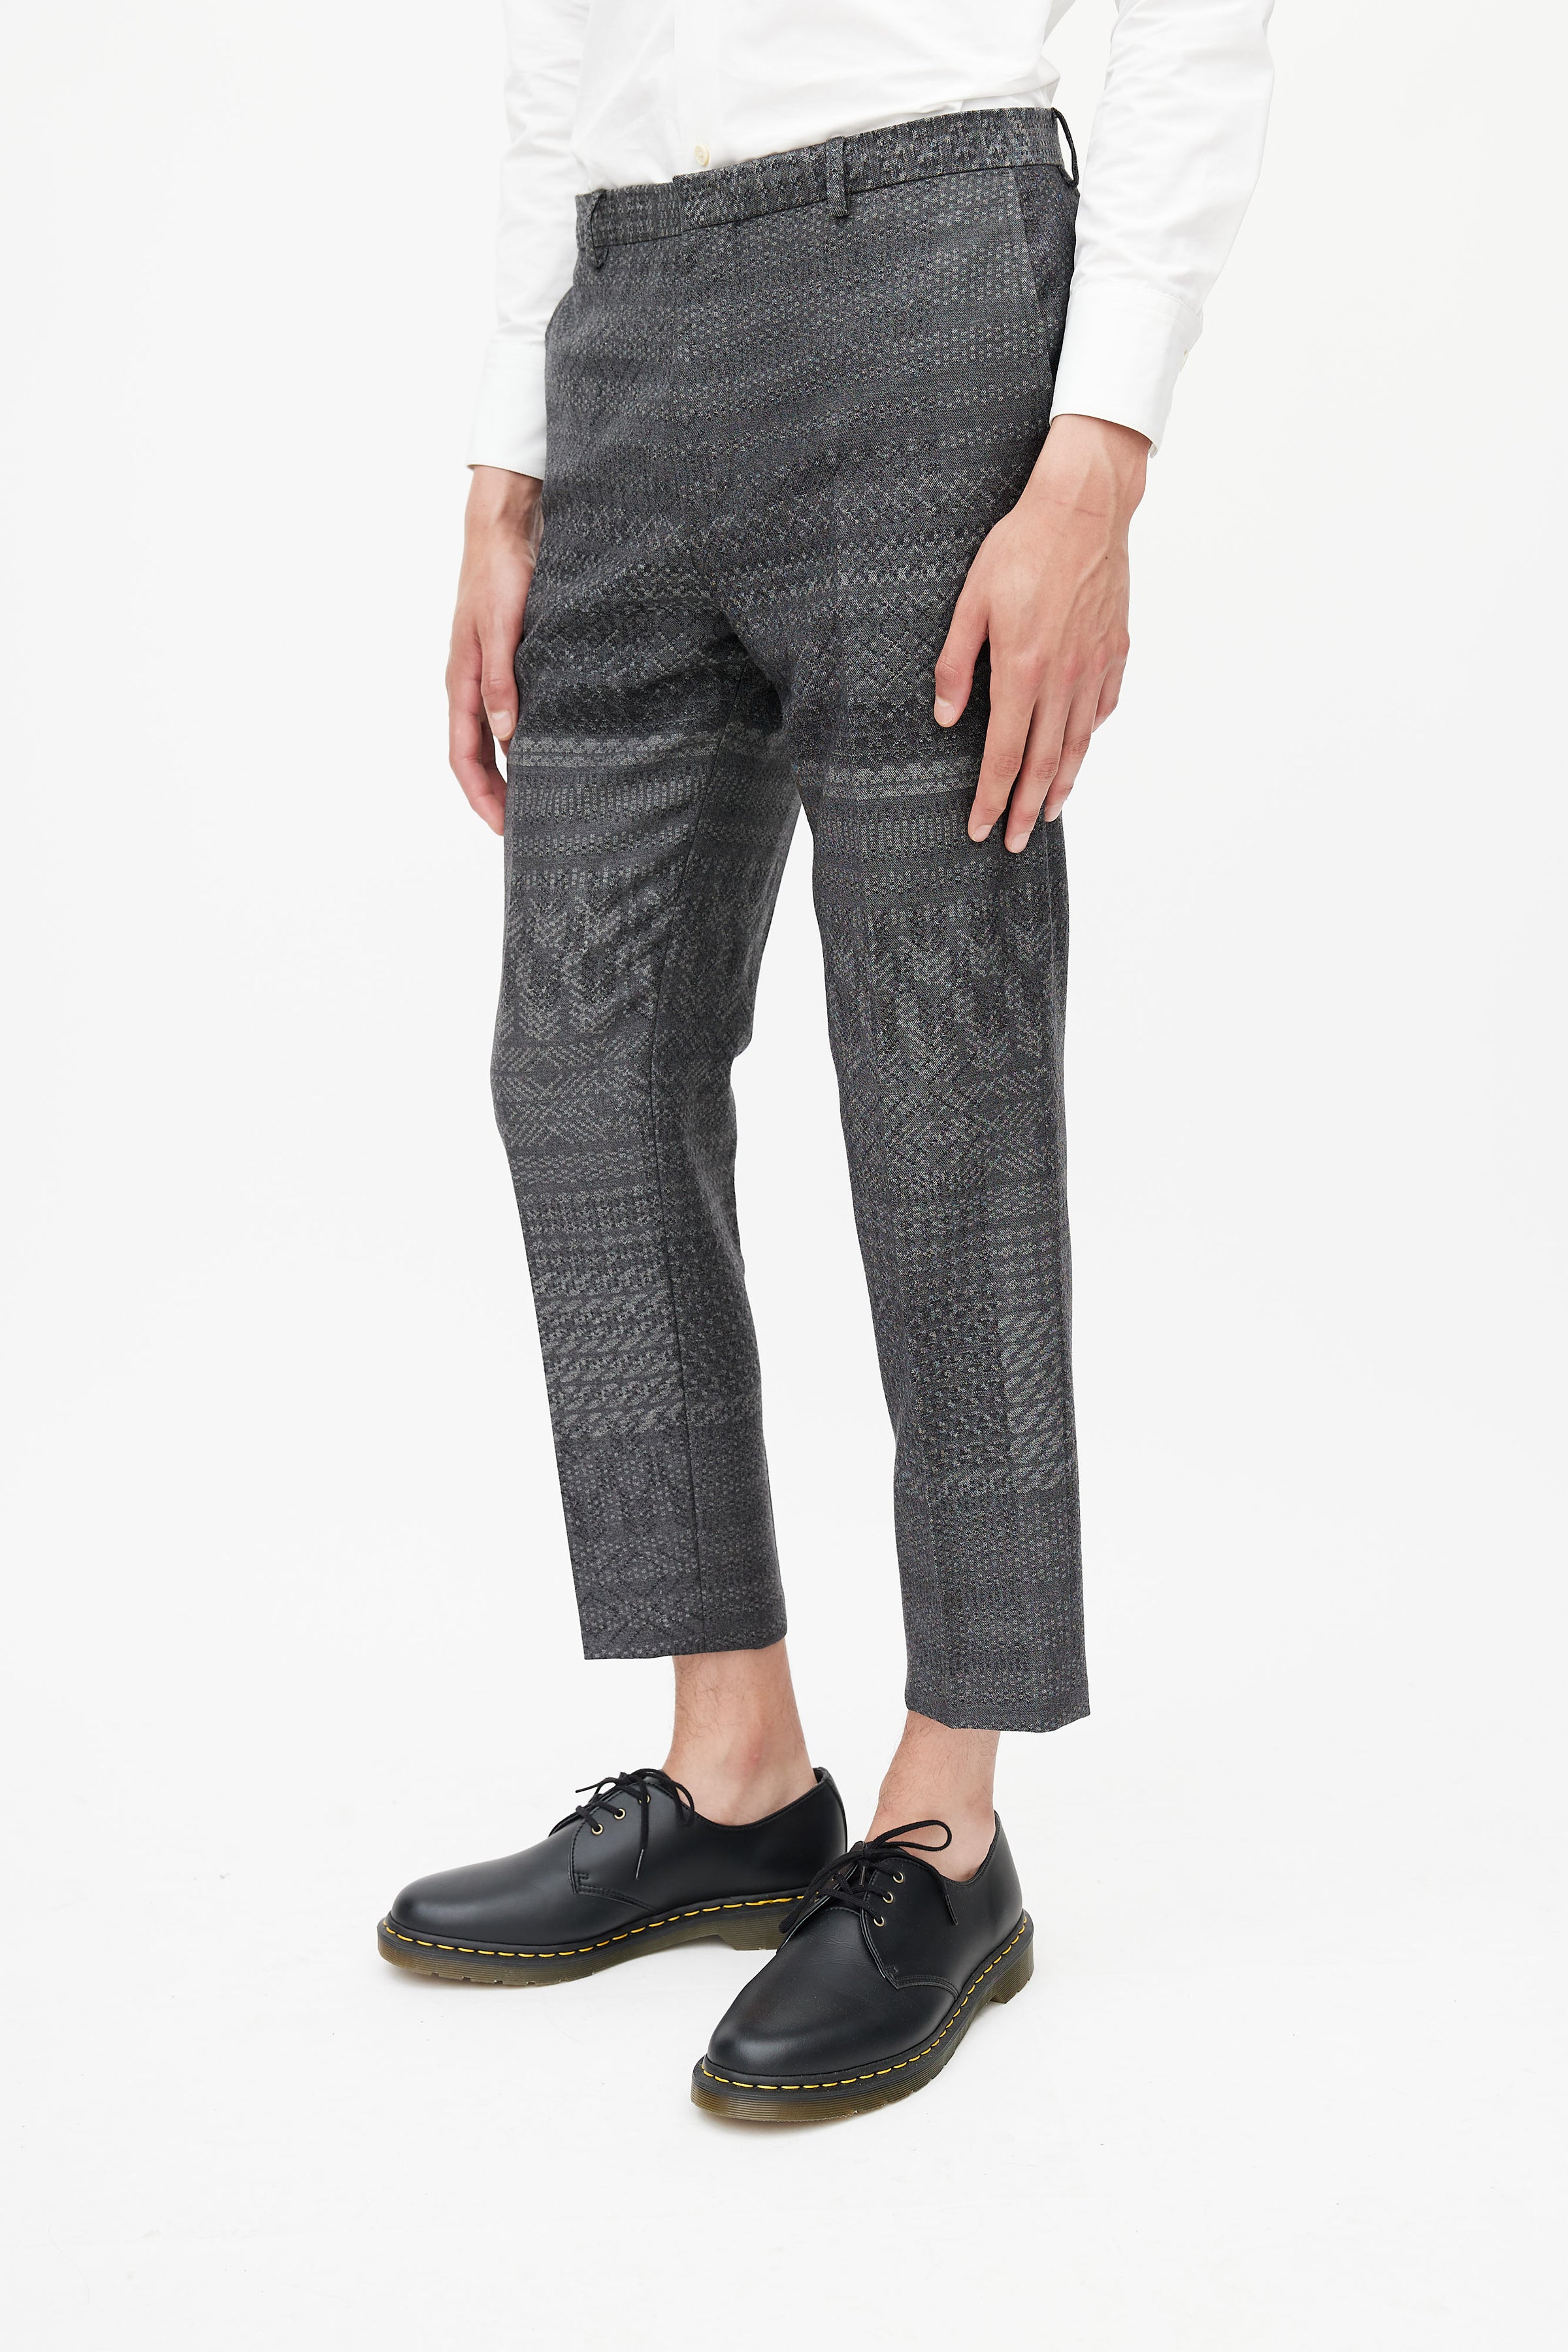 BOSS - Slim-fit trousers in virgin wool with drawstring waist